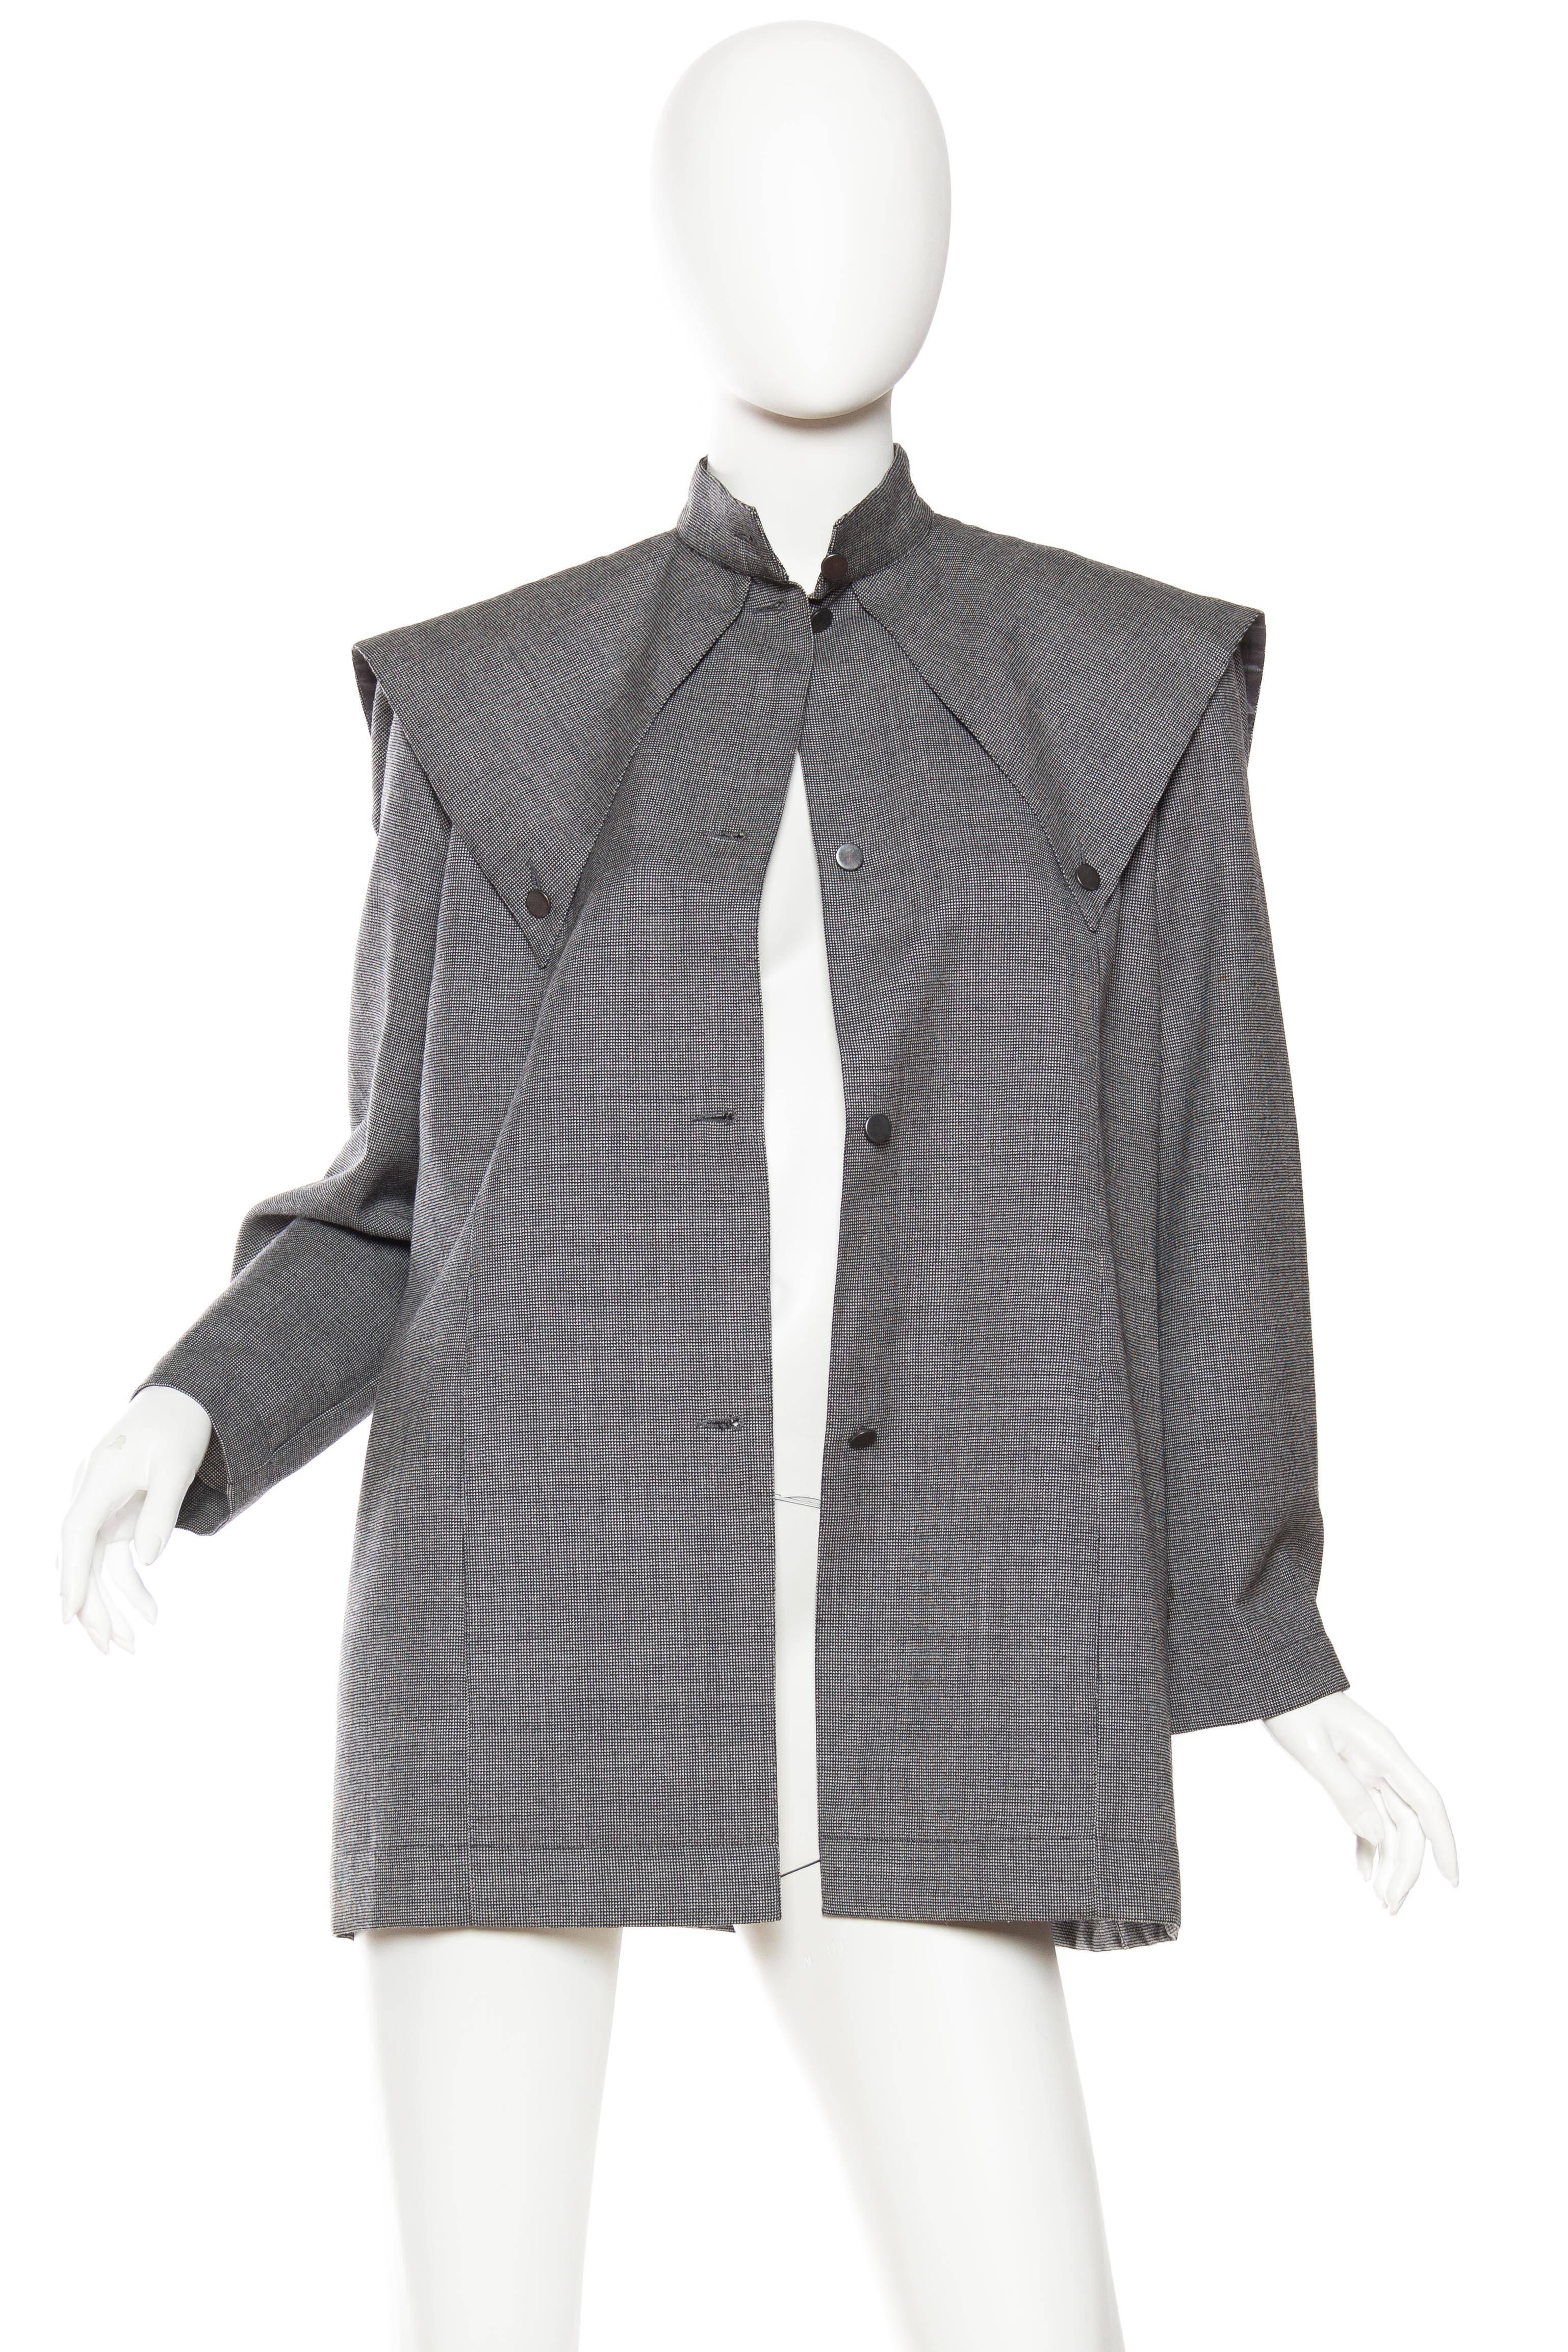 Christian Dior Sharp Modernist Jacket In Excellent Condition In New York, NY